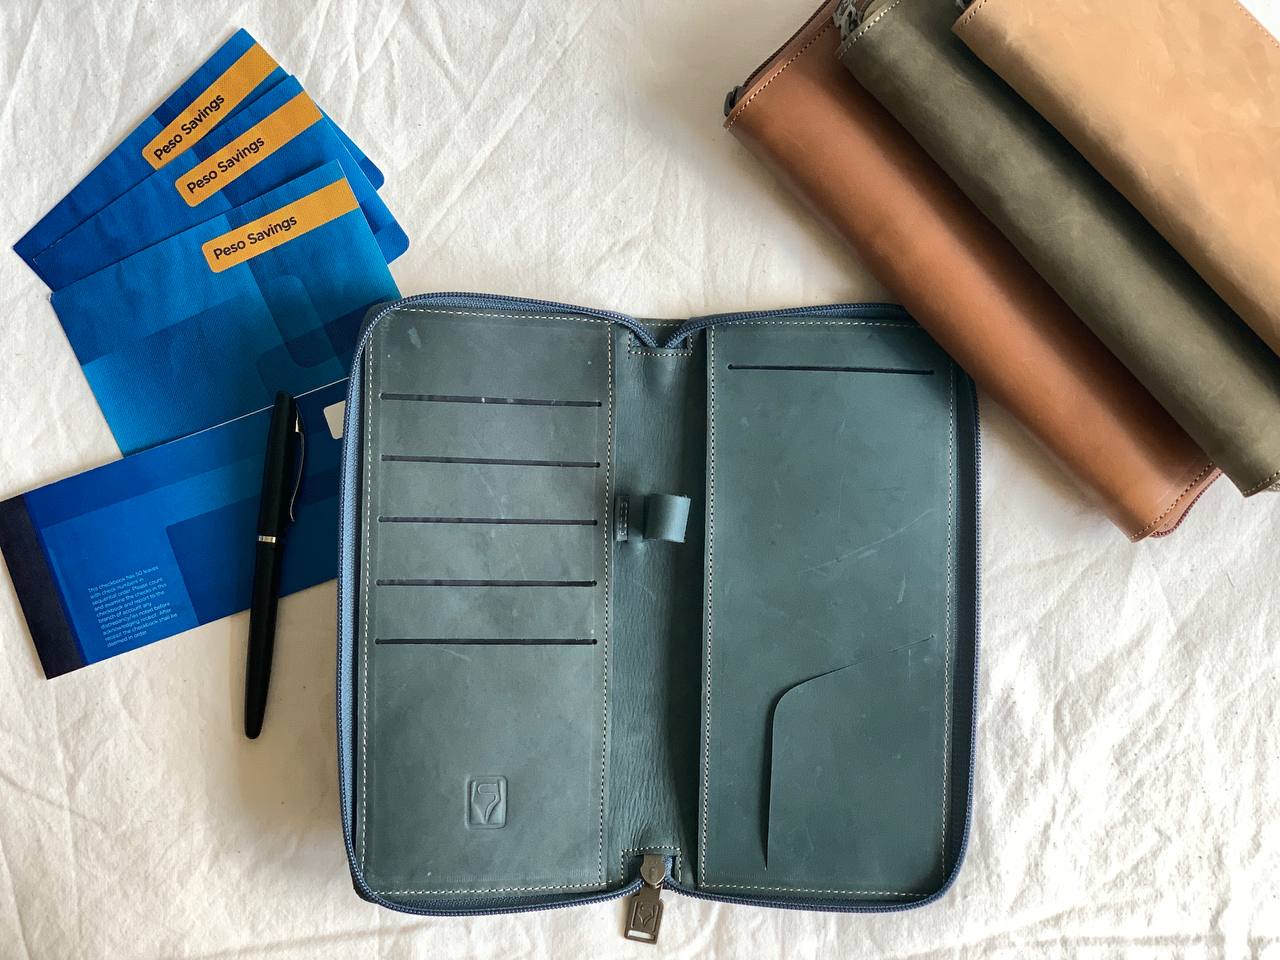 cheque book and passbook holder